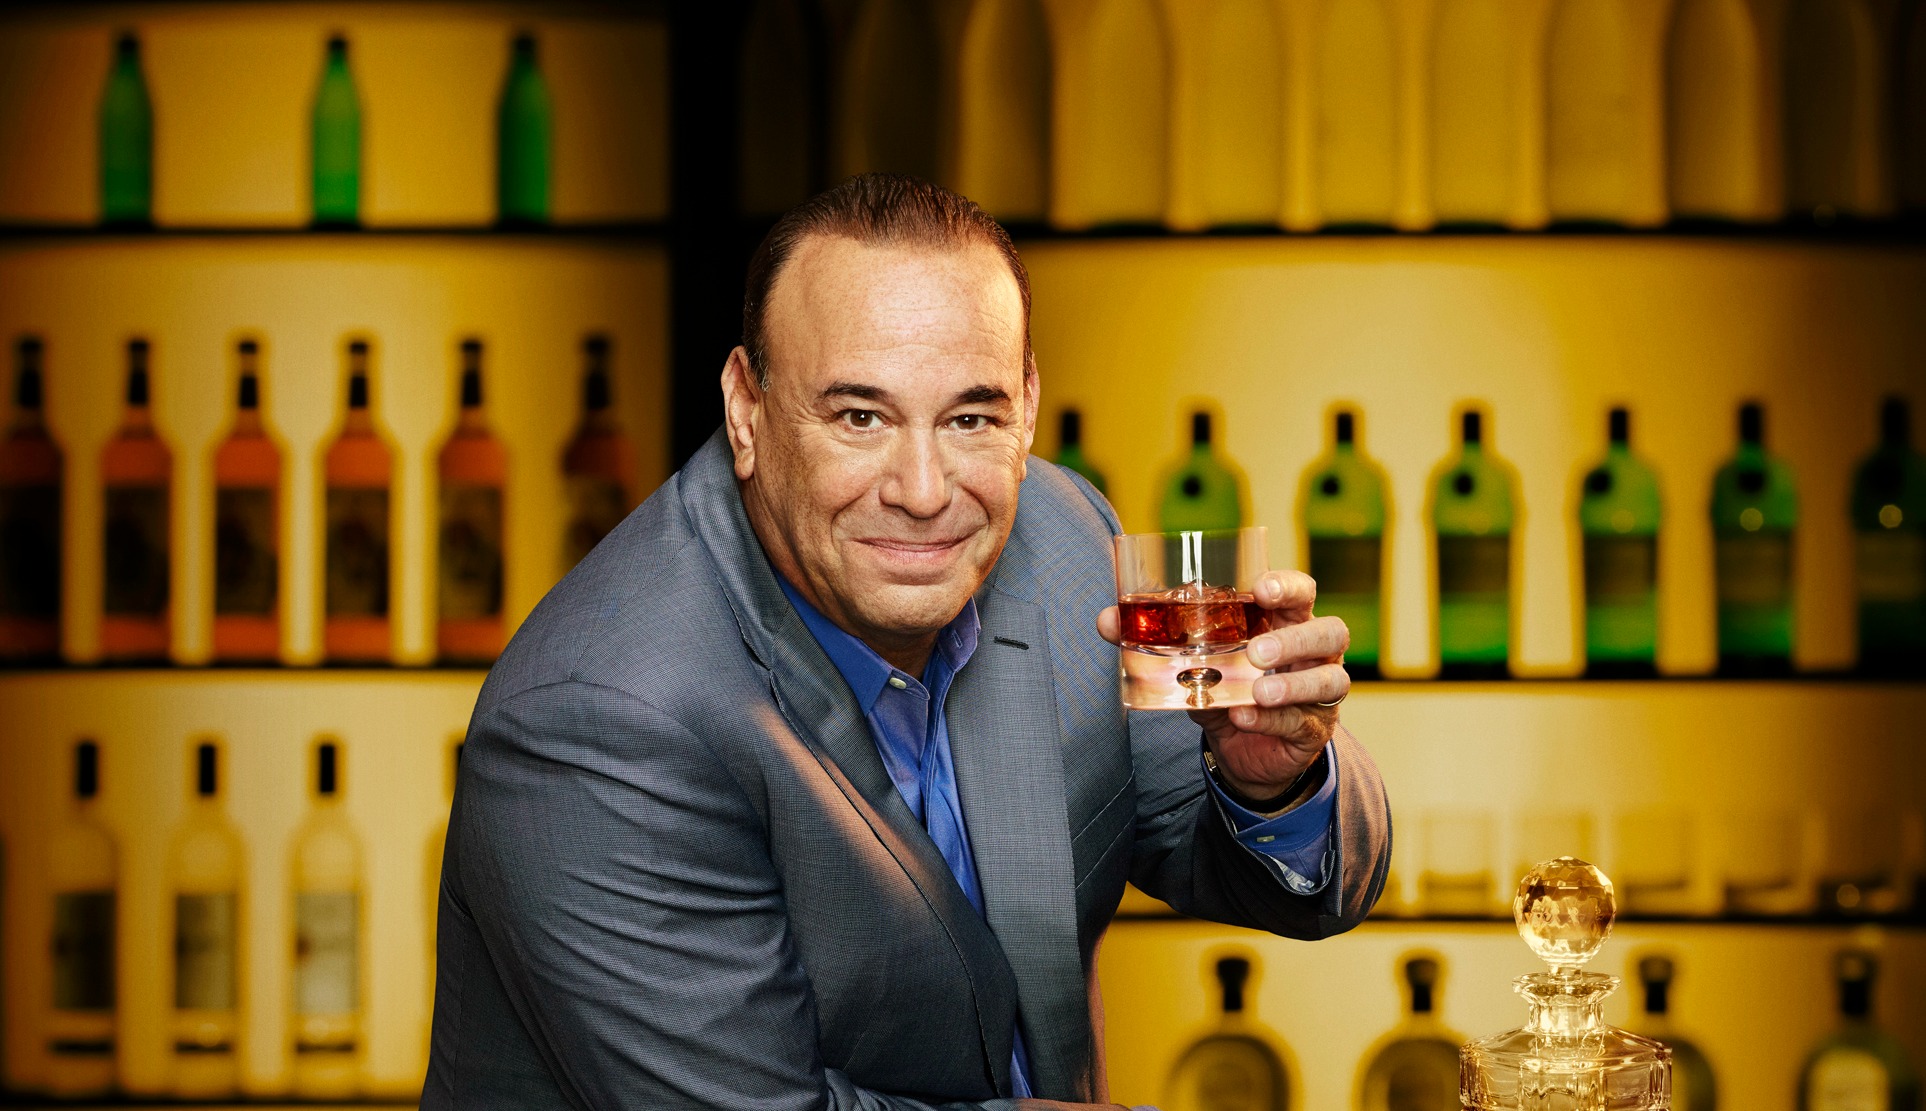 What Does TV's Jon Taffer Really Know About Bar Science? - Food Republic